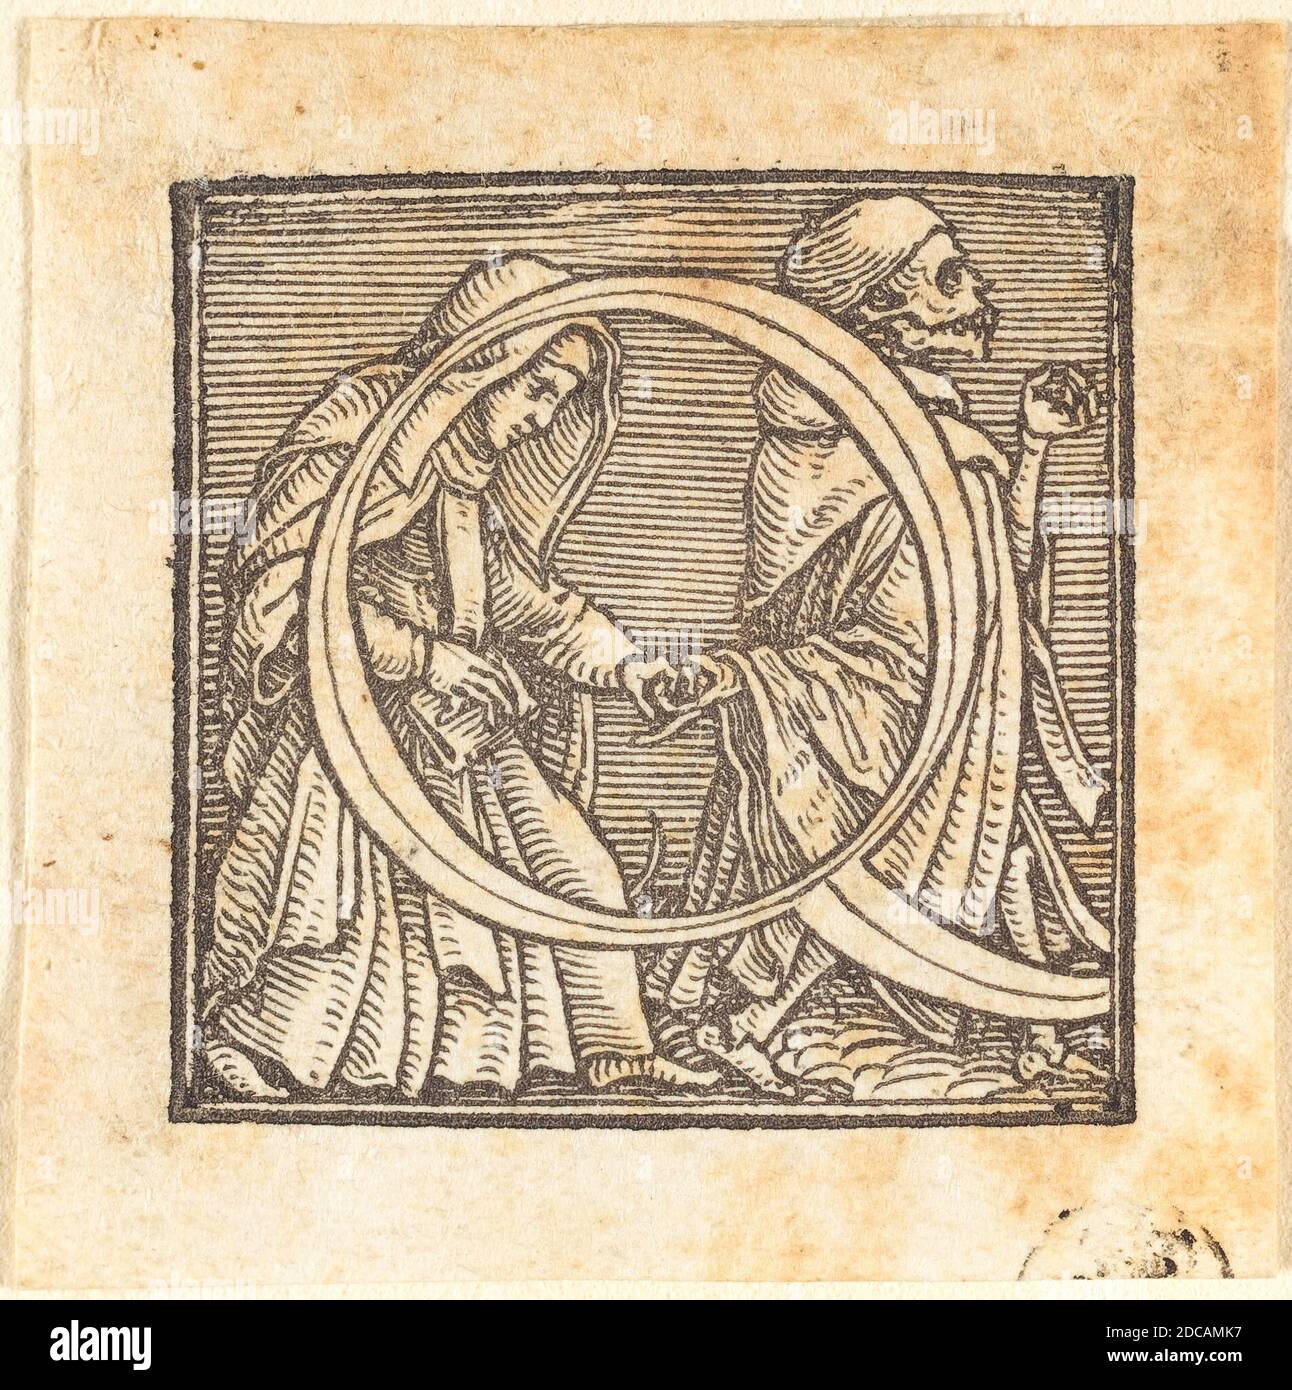 Hans Holbein the Younger, (artist), German, 1497/1498 - 1543, Letter Q, Alphabet of Death, (series), woodcut Stock Photo